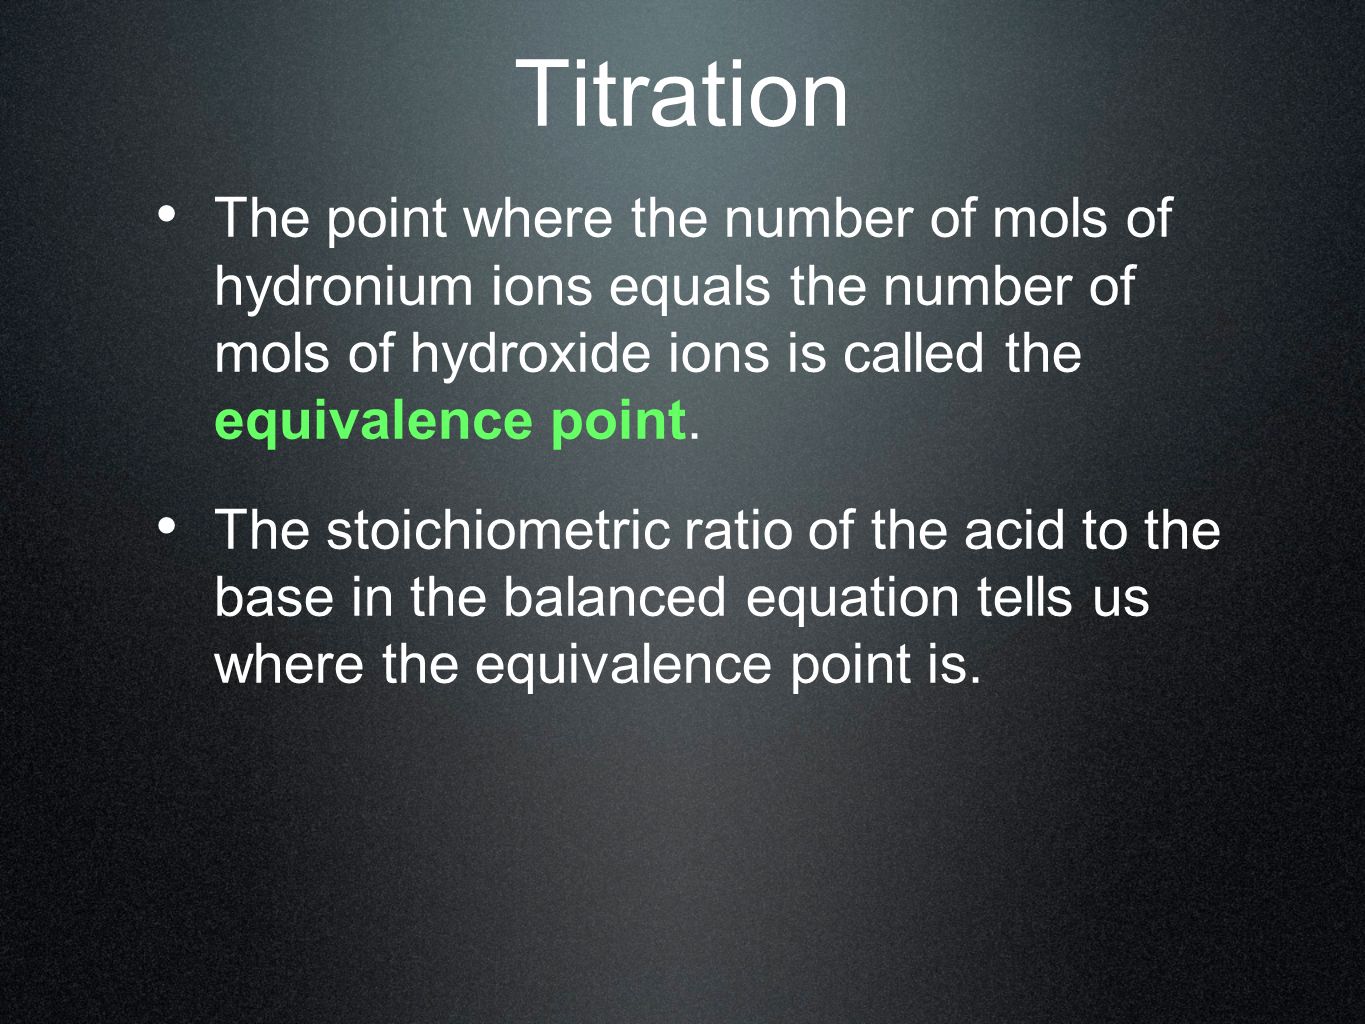 Titration The point where the number of mols of hydronium ions equals the number of mols of hydroxide ions is called the equivalence point.